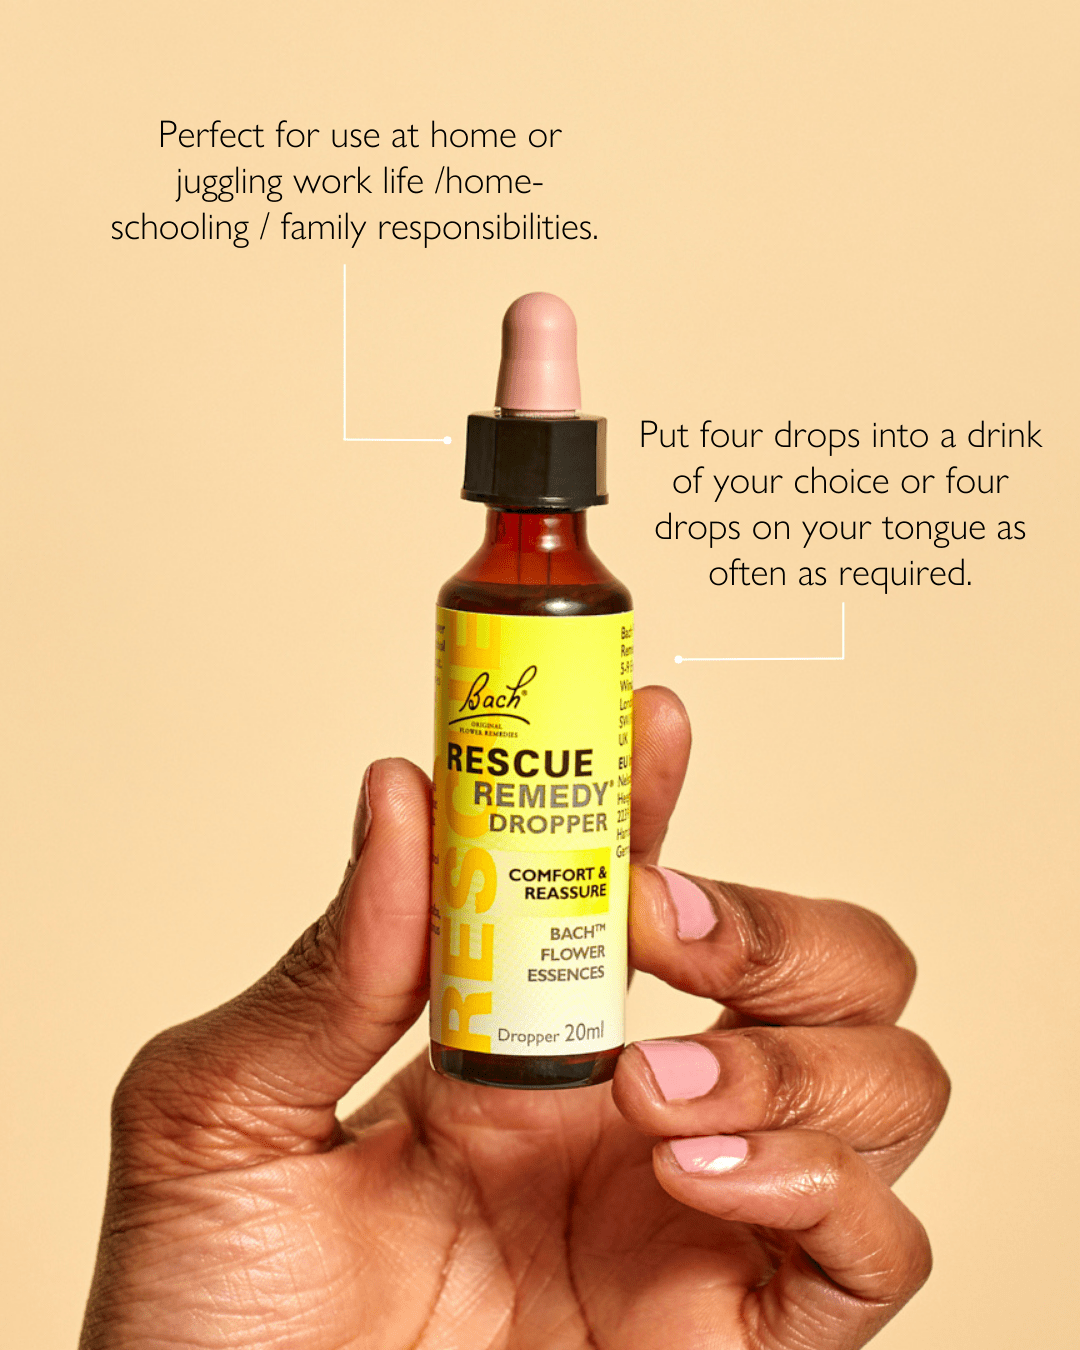 Infographic of a hand holding the Rescue® Remedy Dropper 20ml and two sentences that says"Perfect for use at  home or juggling work life/home-schooling/family responsabilities"  and "Put four drops into a drink of your choice or four drops on your tongue as often as required".